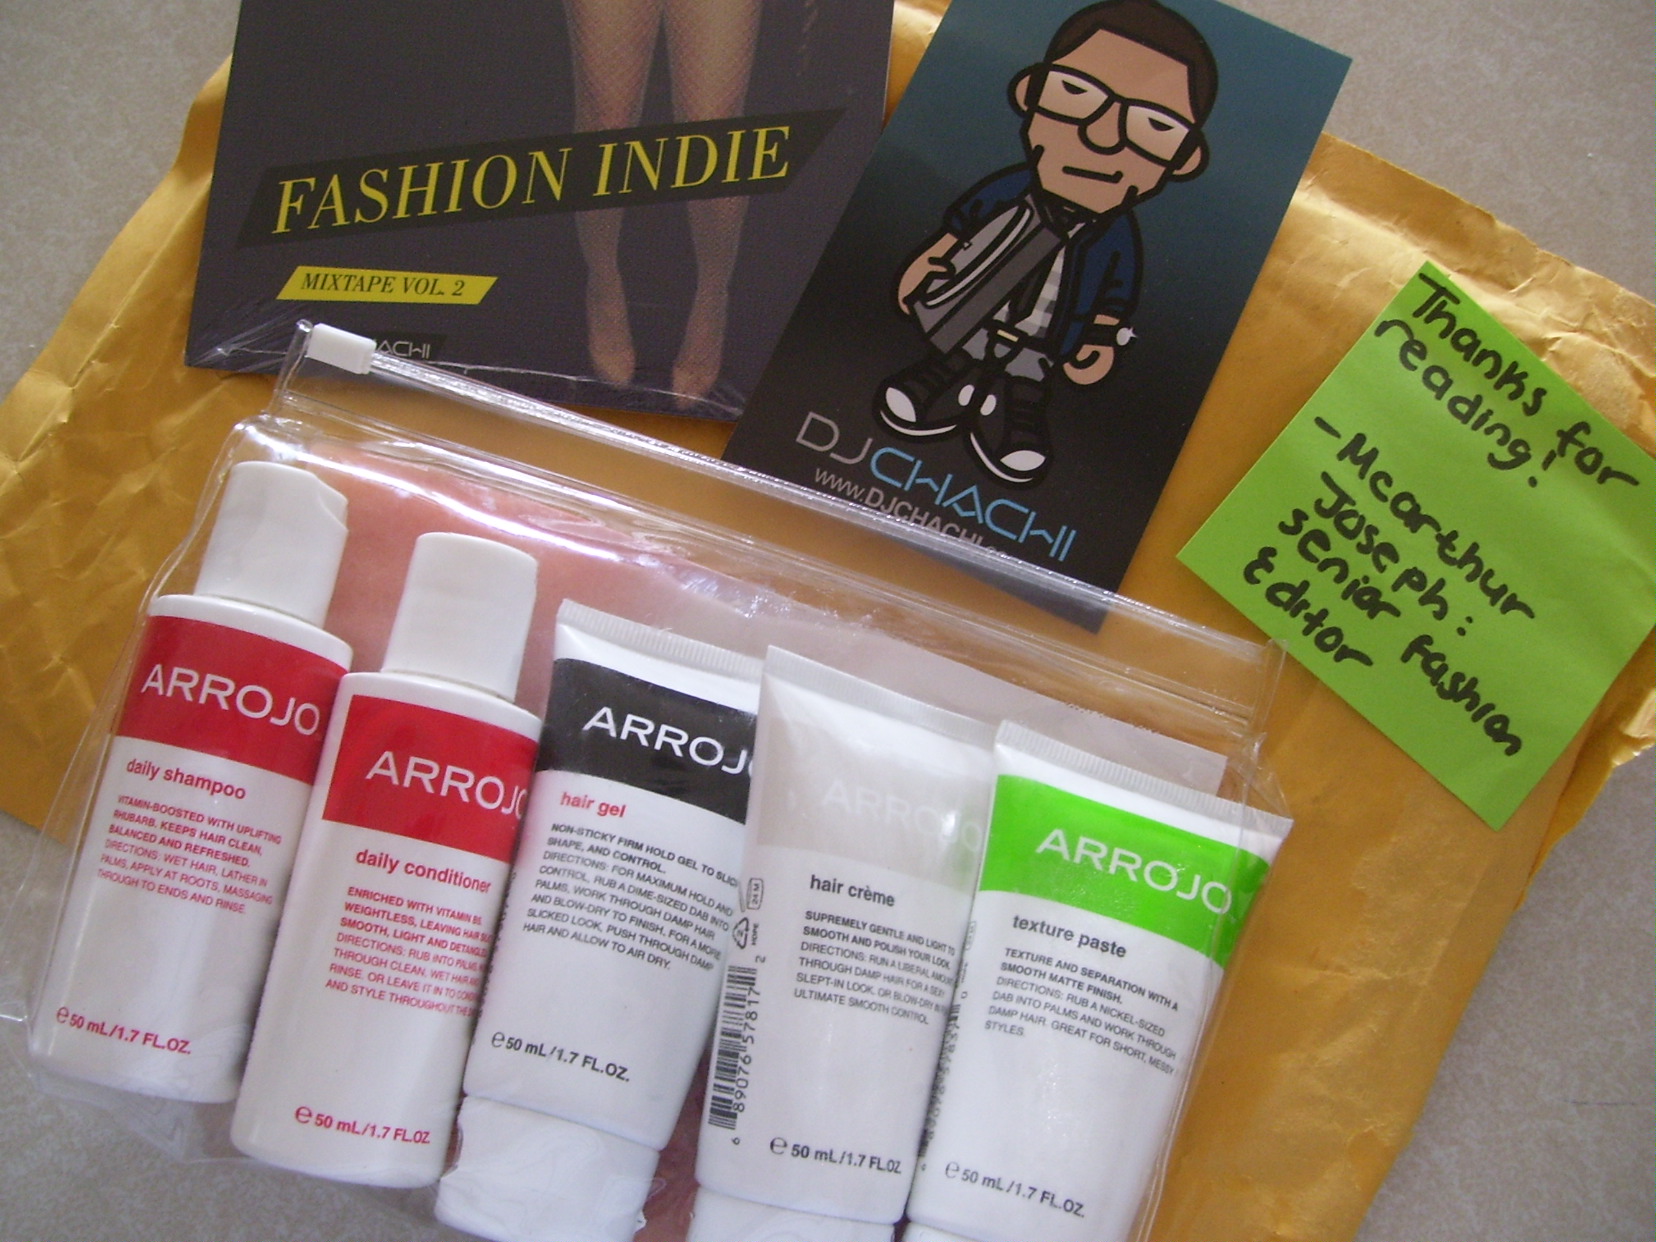 Thanks FashionIndie.com!! What I Won in a Twitter Giveaway!